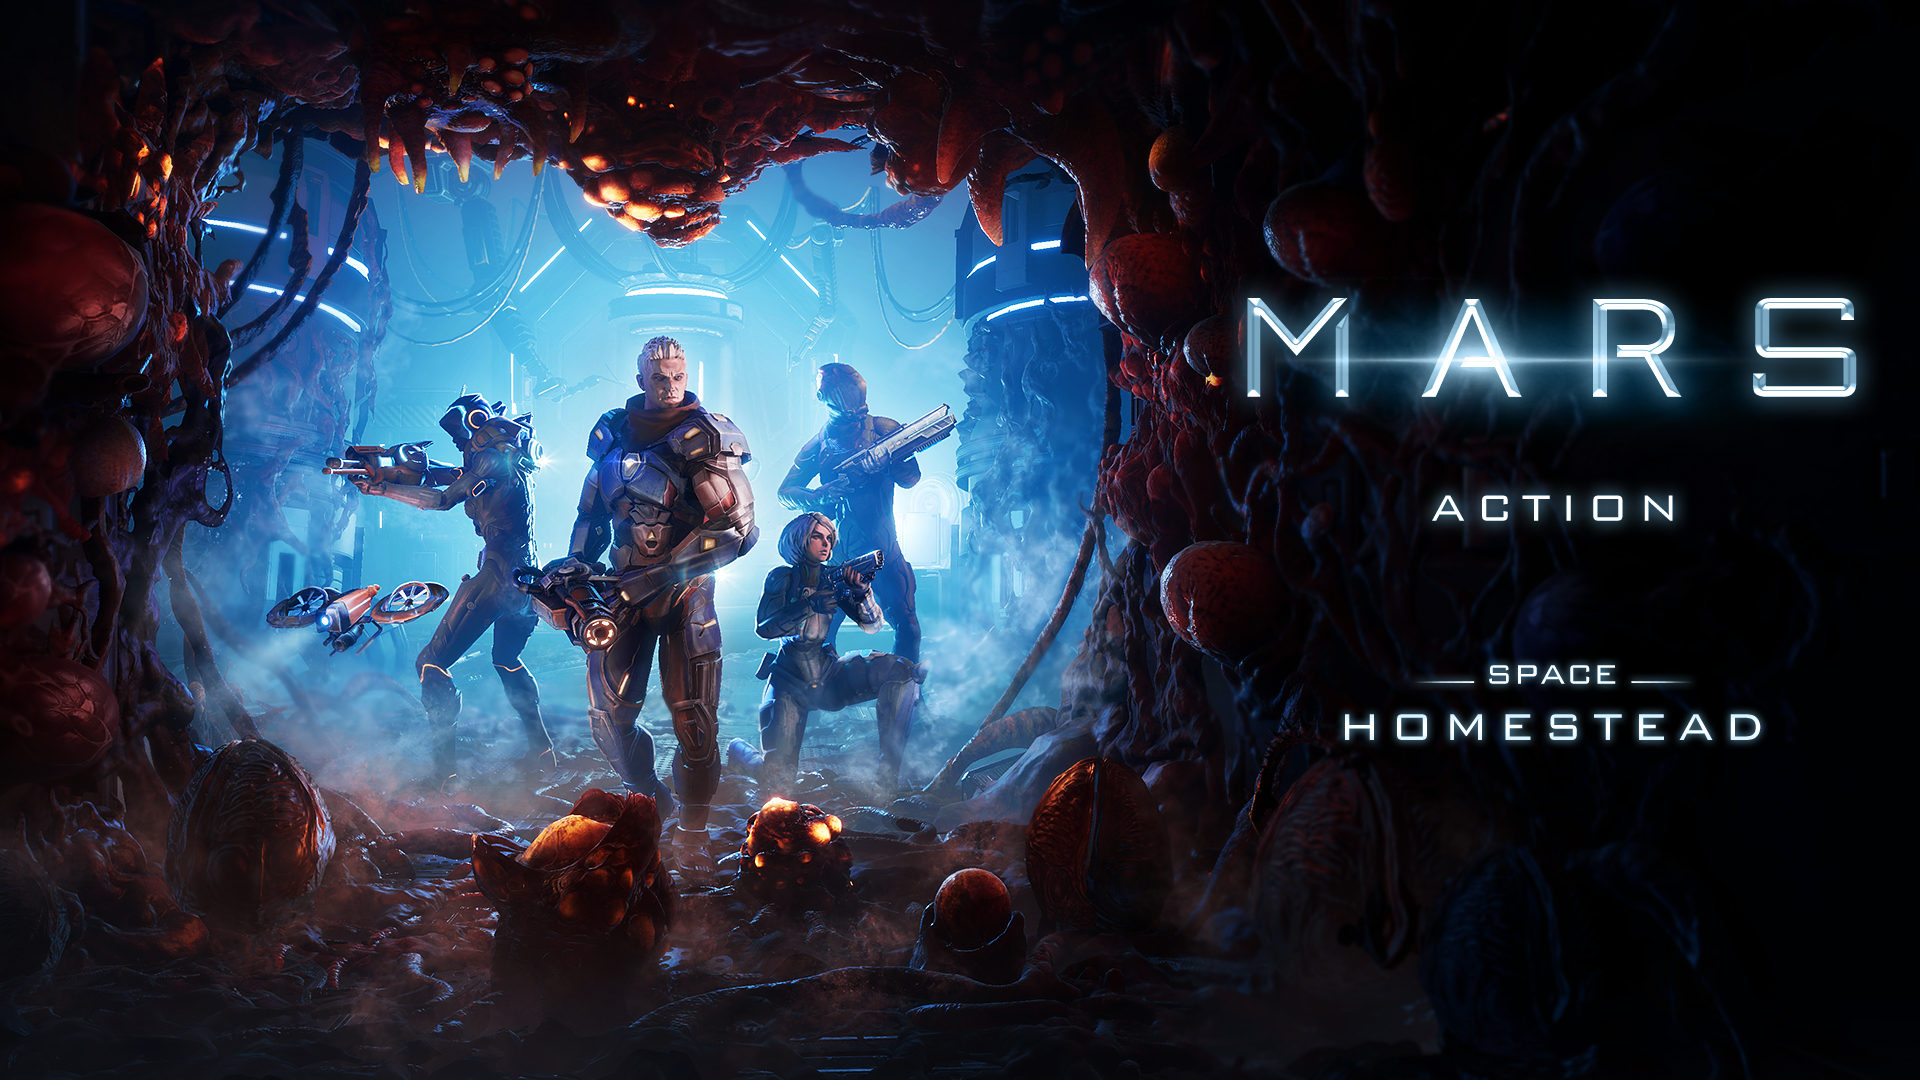 Download Marsaction 2: Space Homestead Android free game.